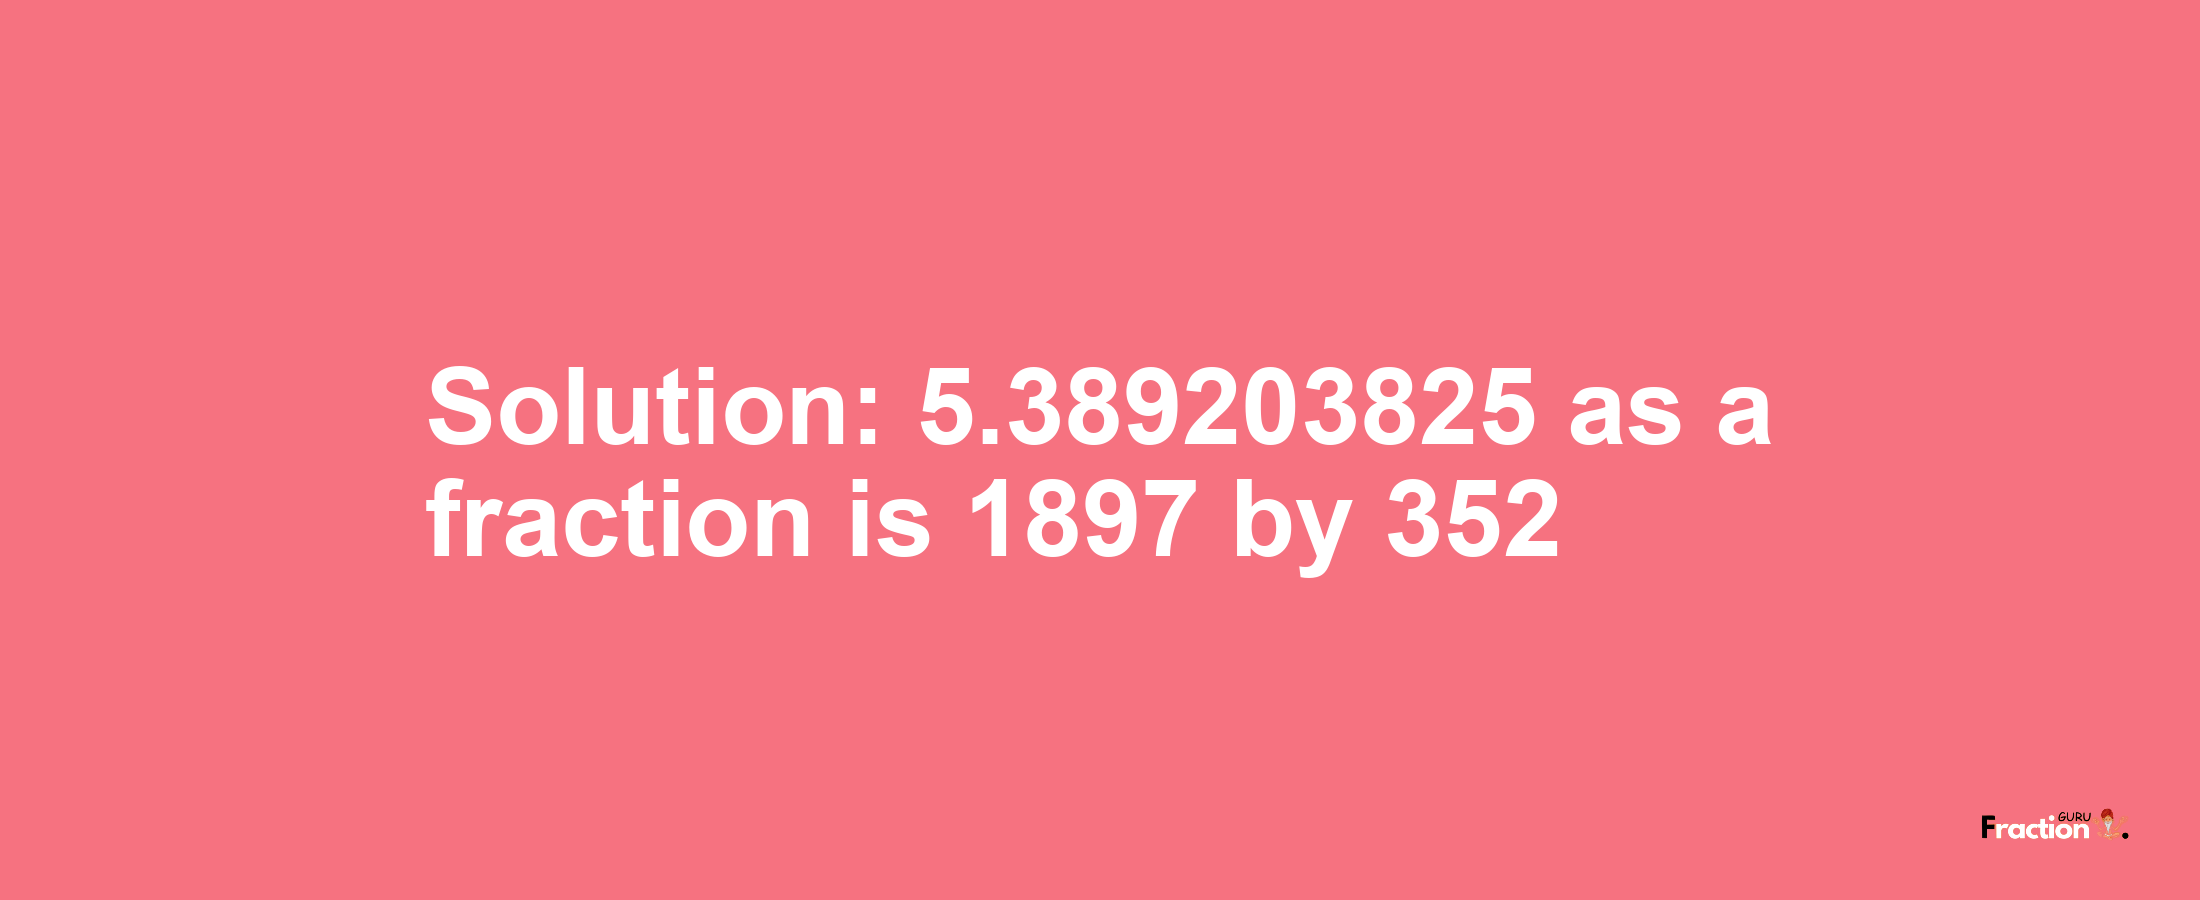 Solution:5.389203825 as a fraction is 1897/352